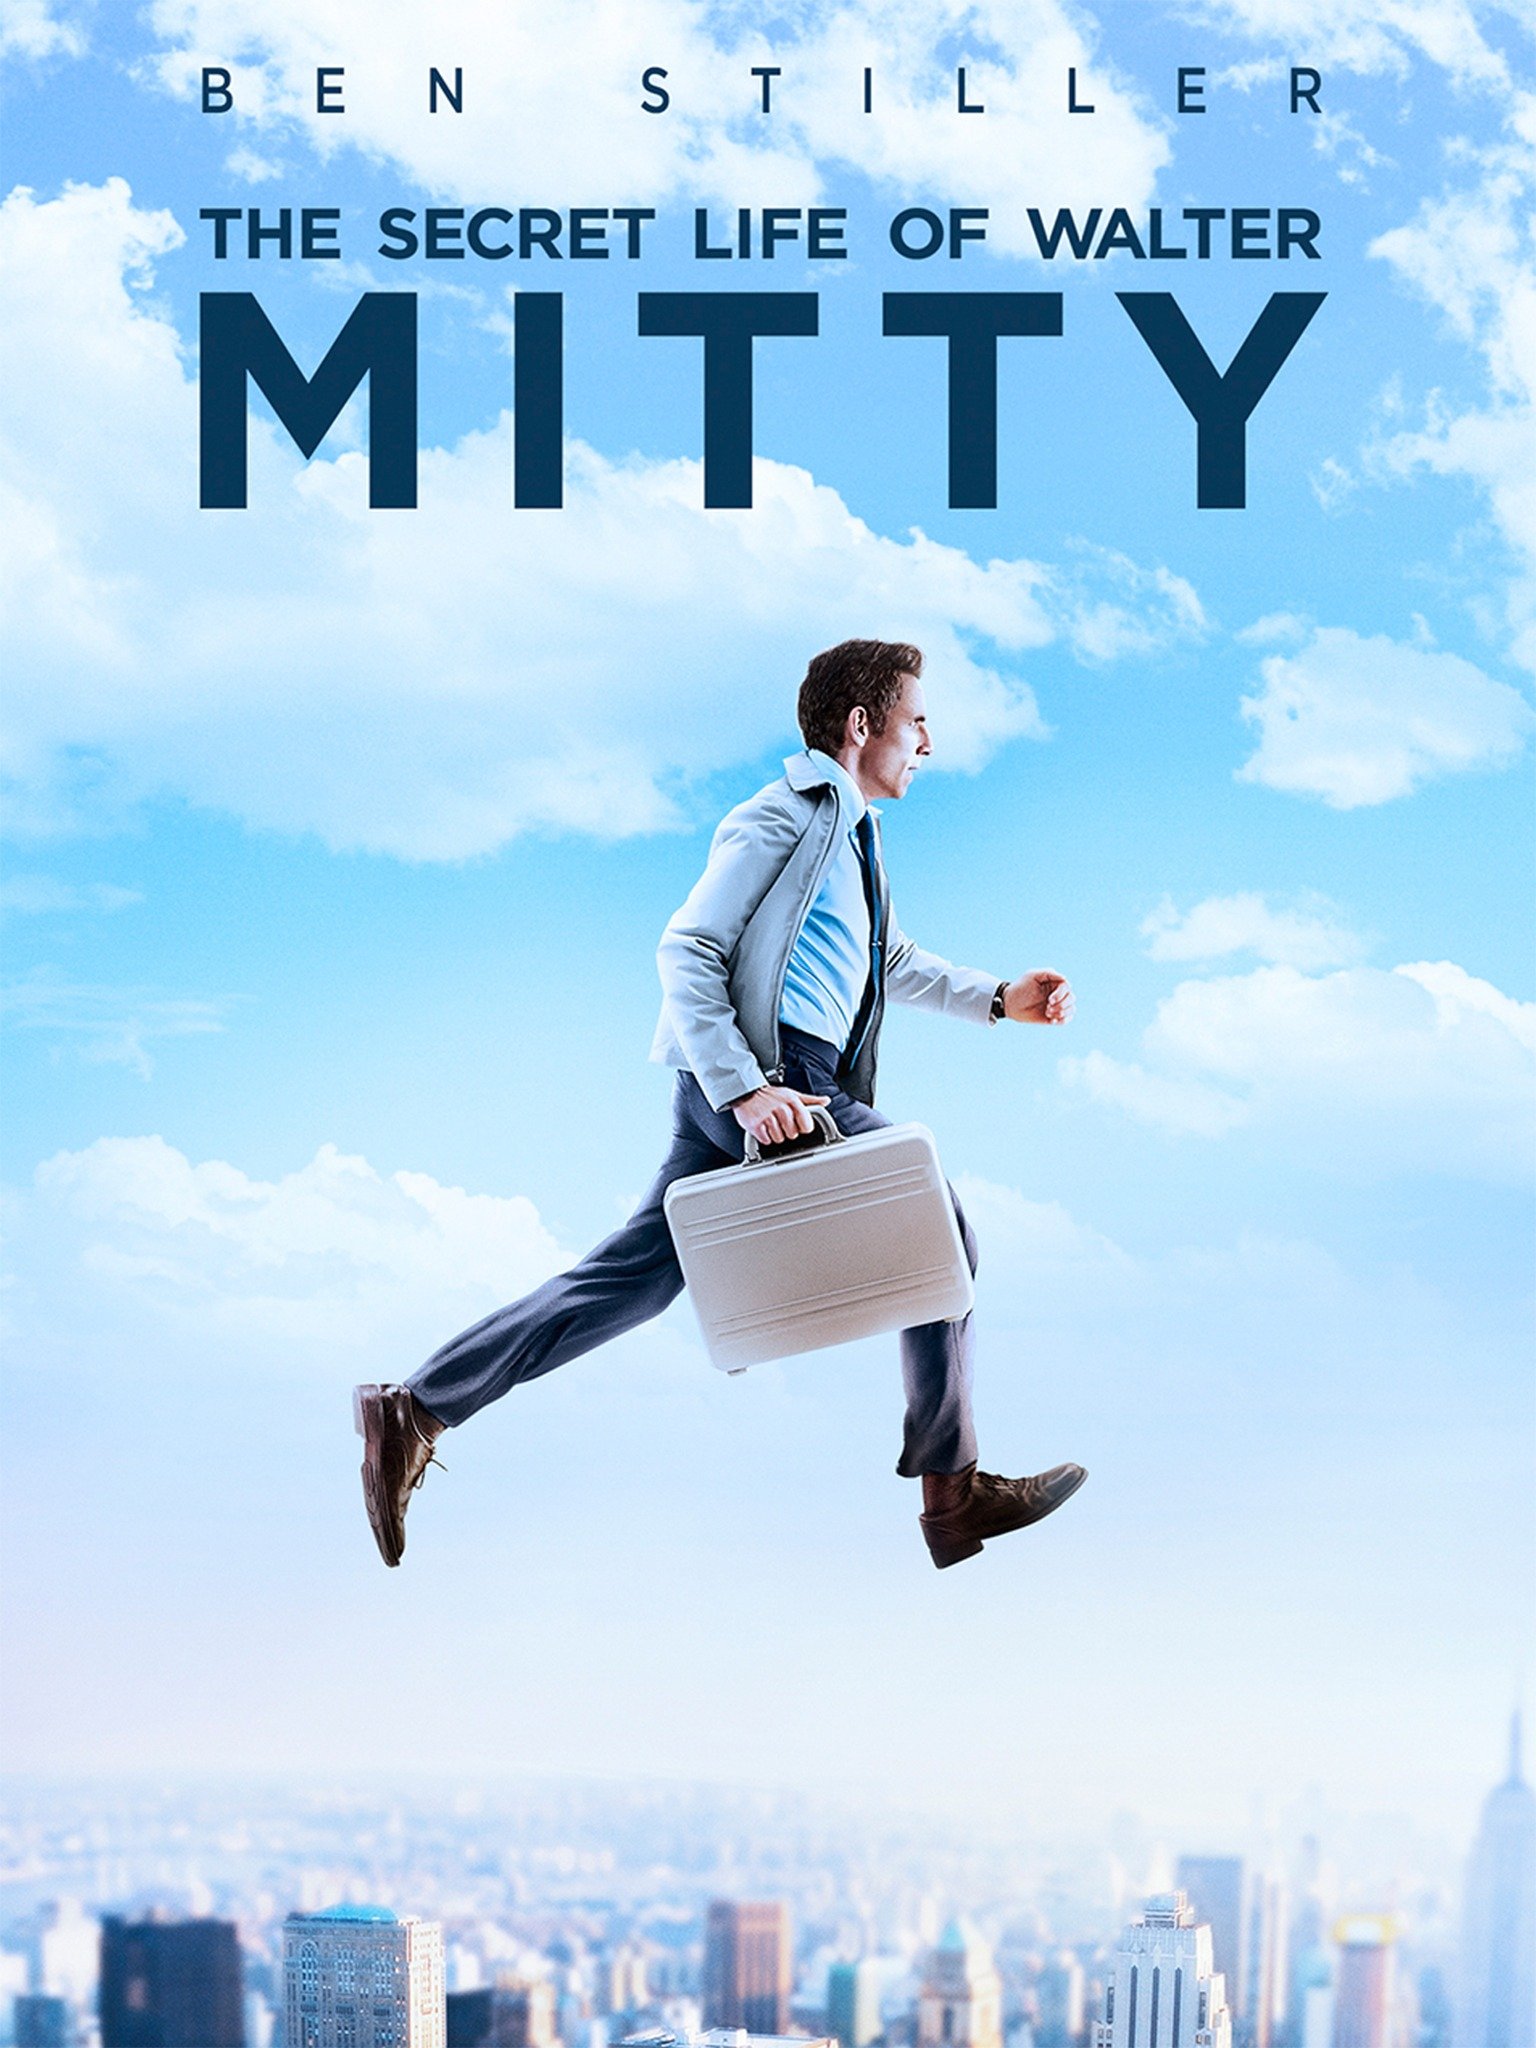 The Secret Life of Walter Mitty (2013) - Rotten Tomatoes